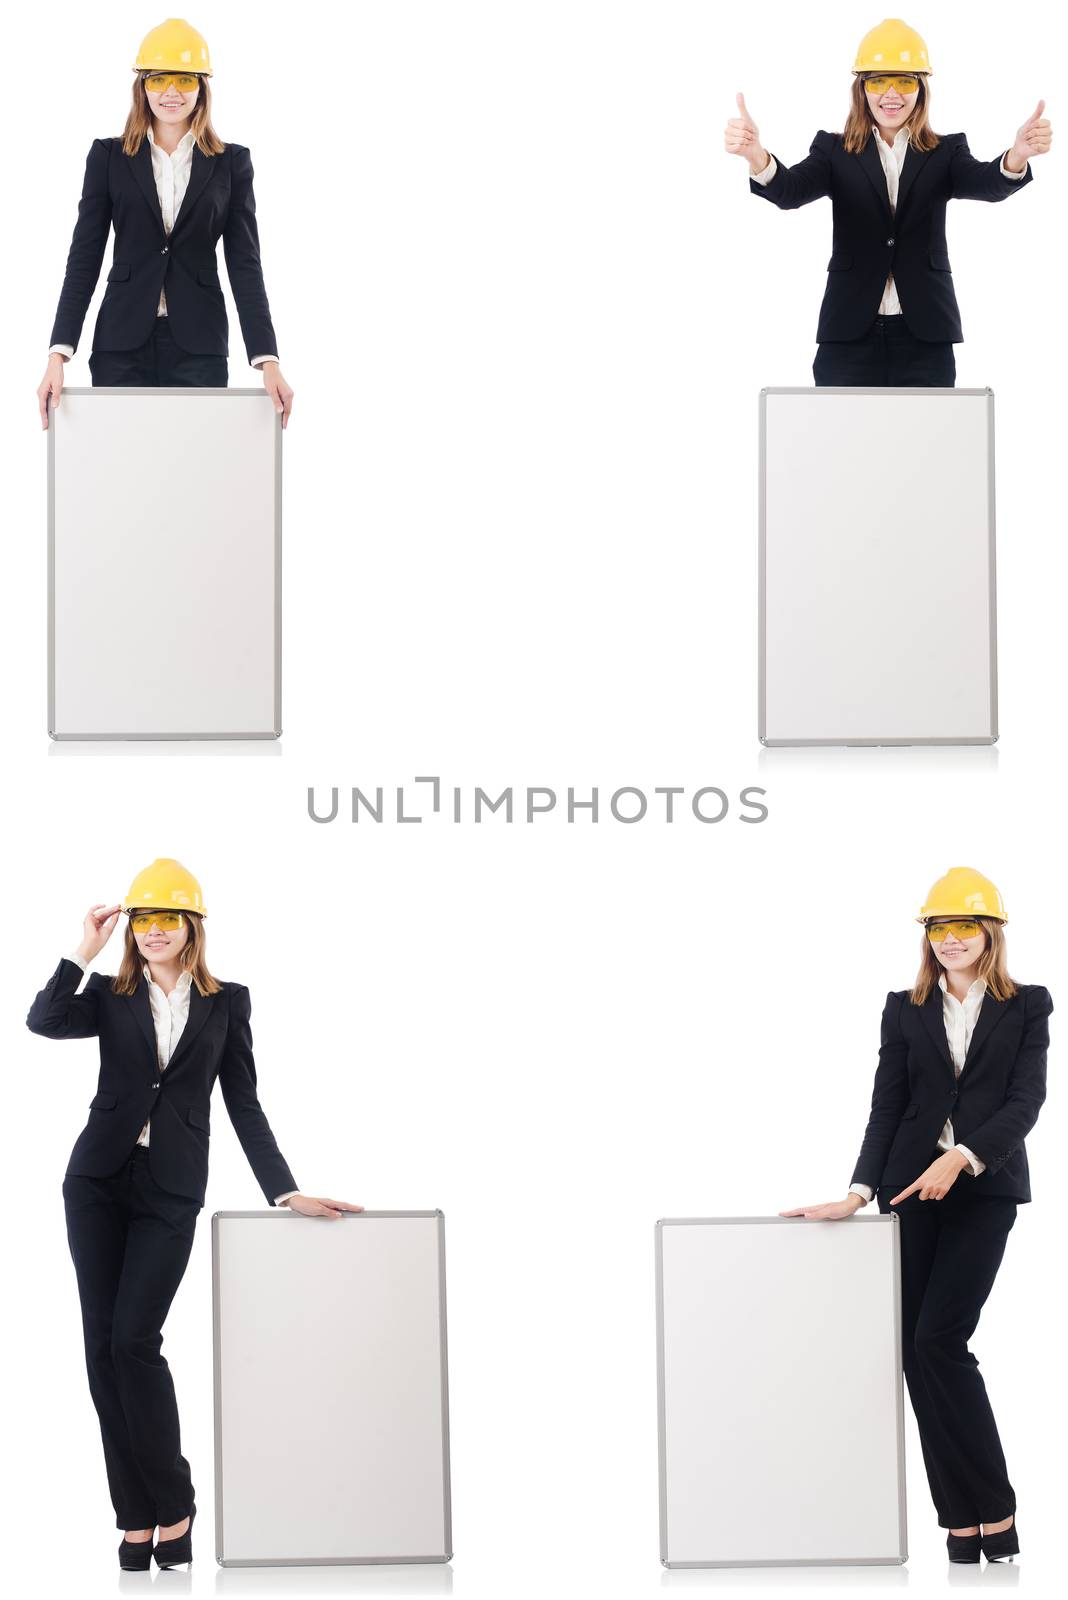 Young female builder with whiteboard  by Elnur